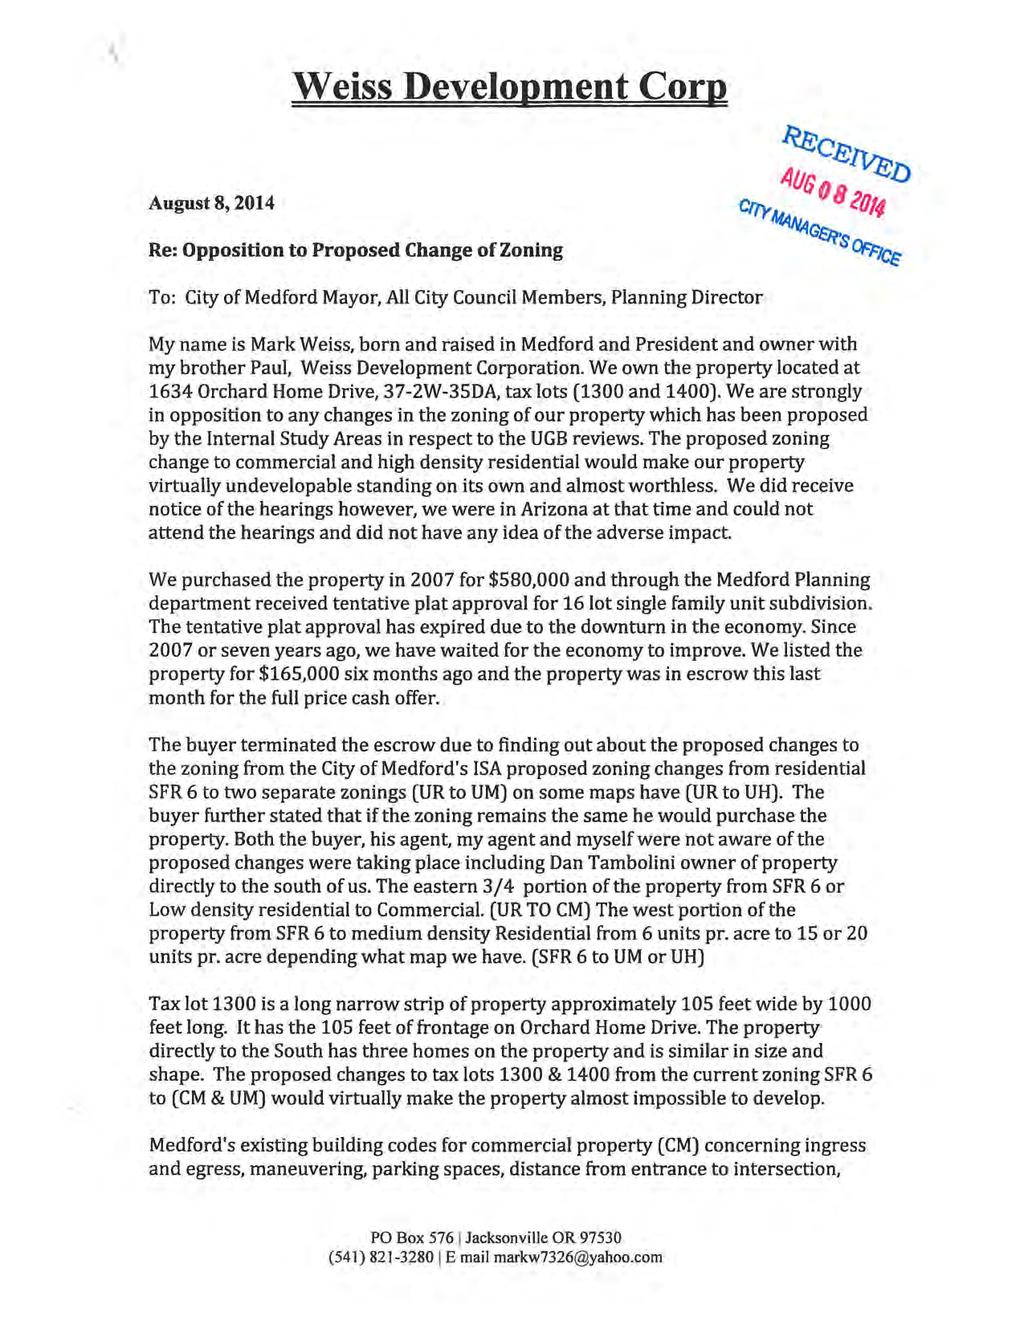 . Weiss Development Coru August 8,2014 Re: Opposition to Proposed Change ofzoning To: City of Medford Mayor, All City Council Members, Planning Director Myname is Mark Weiss, born and raised in